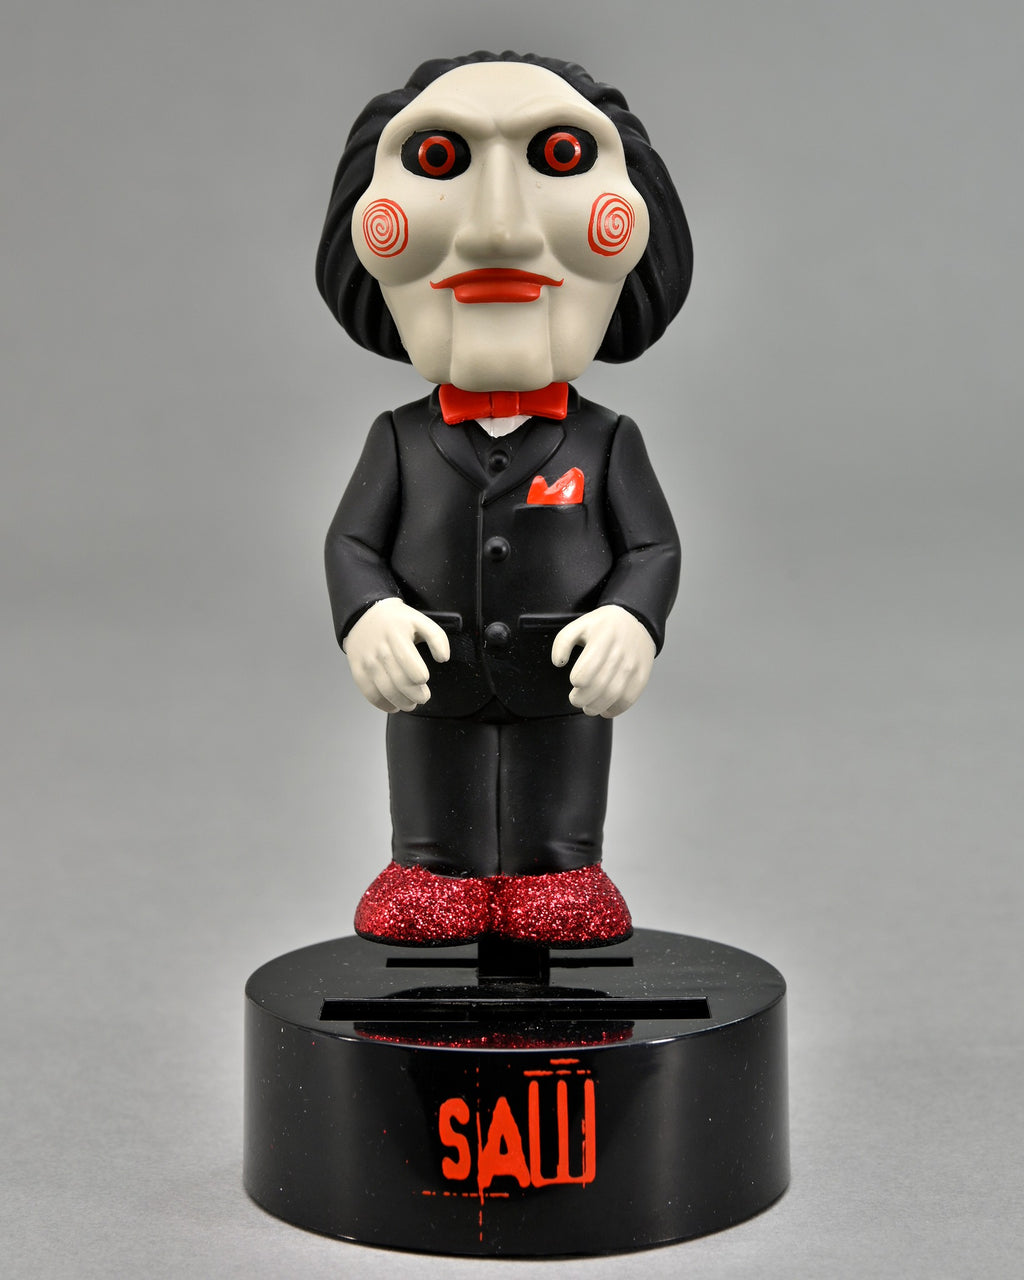 SAW BILLY THE PUPPET BODY KNOCKER "PRE-ORDER JUL 2023 APPROX"